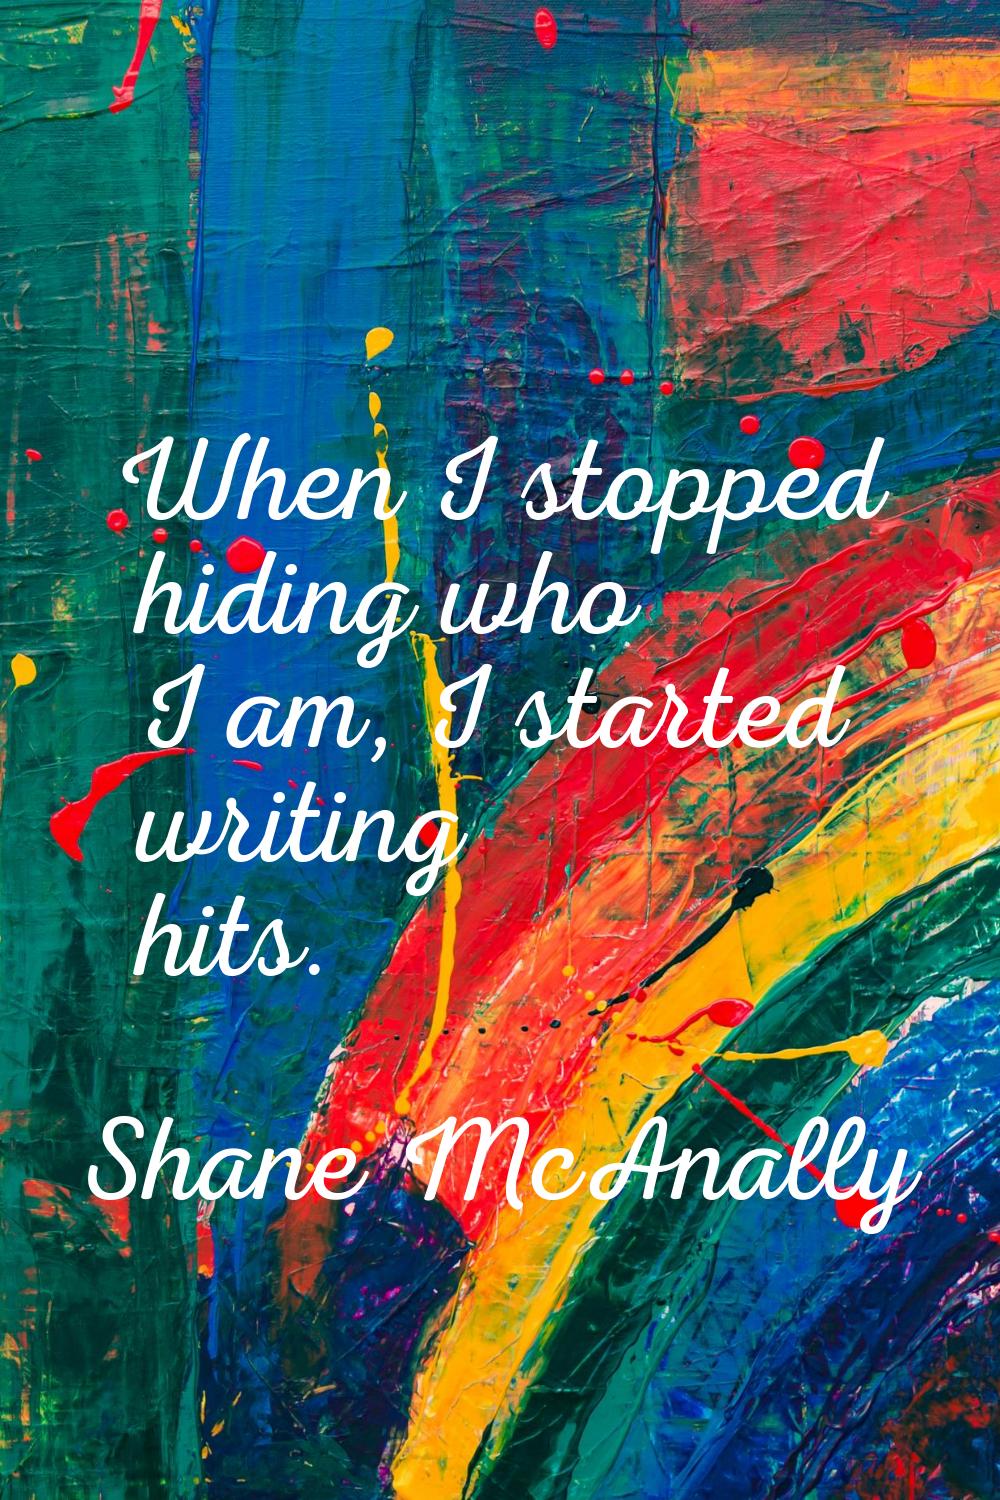 When I stopped hiding who I am, I started writing hits.